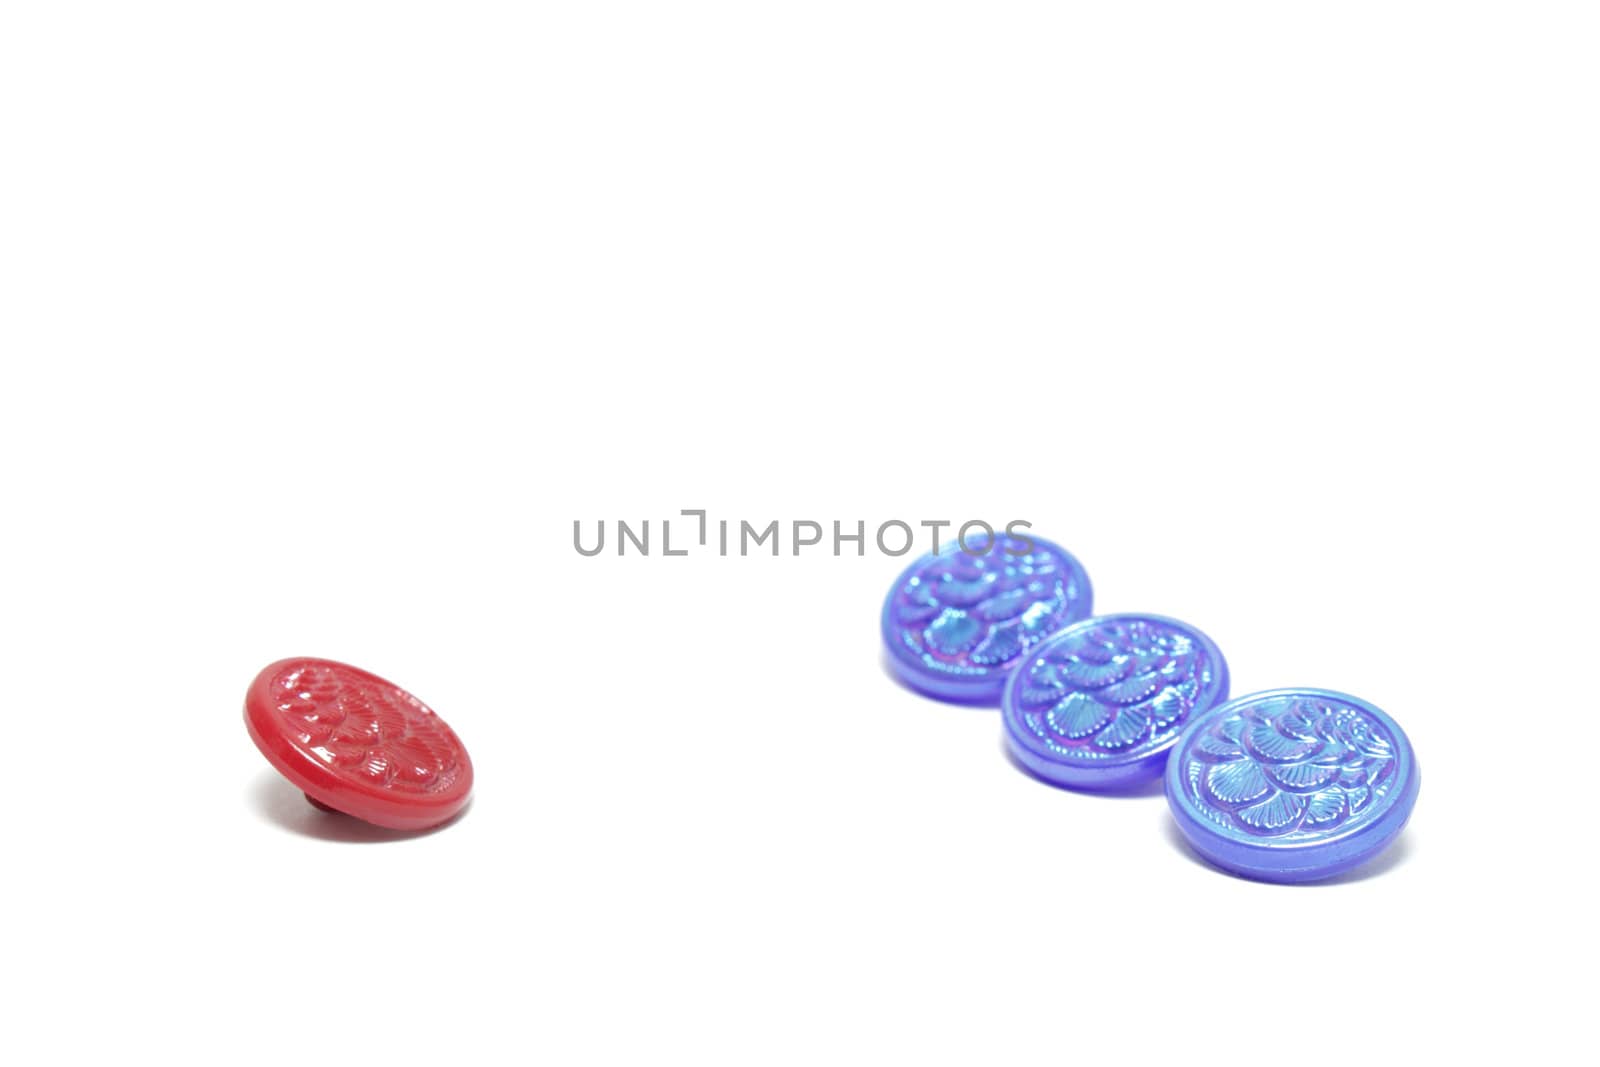 One red button and three blue ones isolated on white background